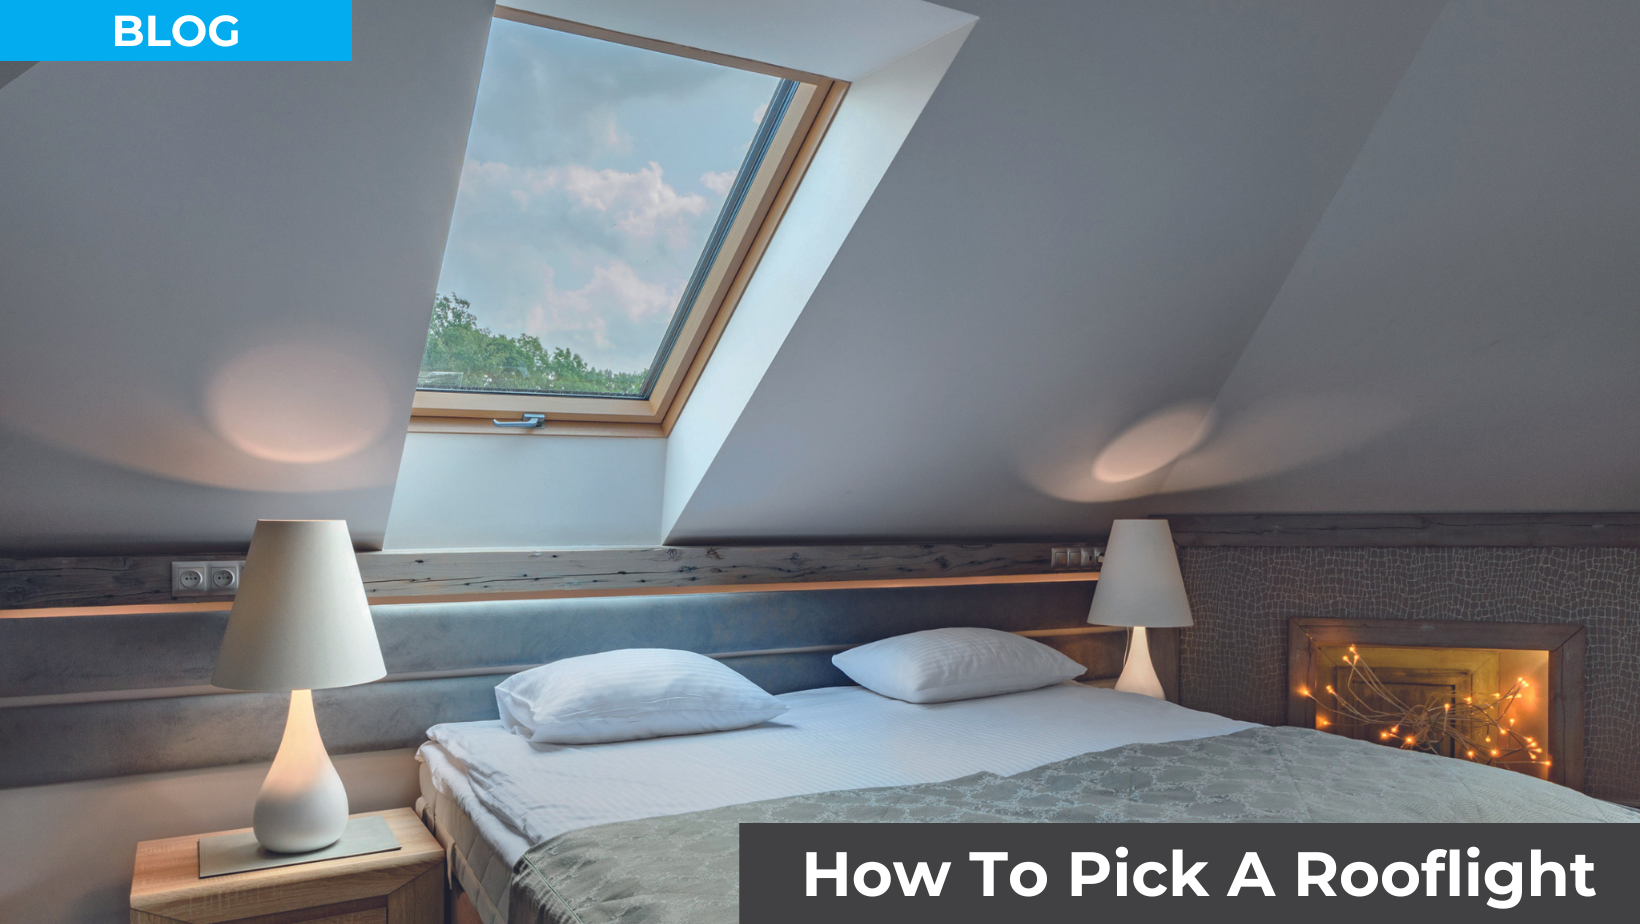 How To Pick A Rooflight